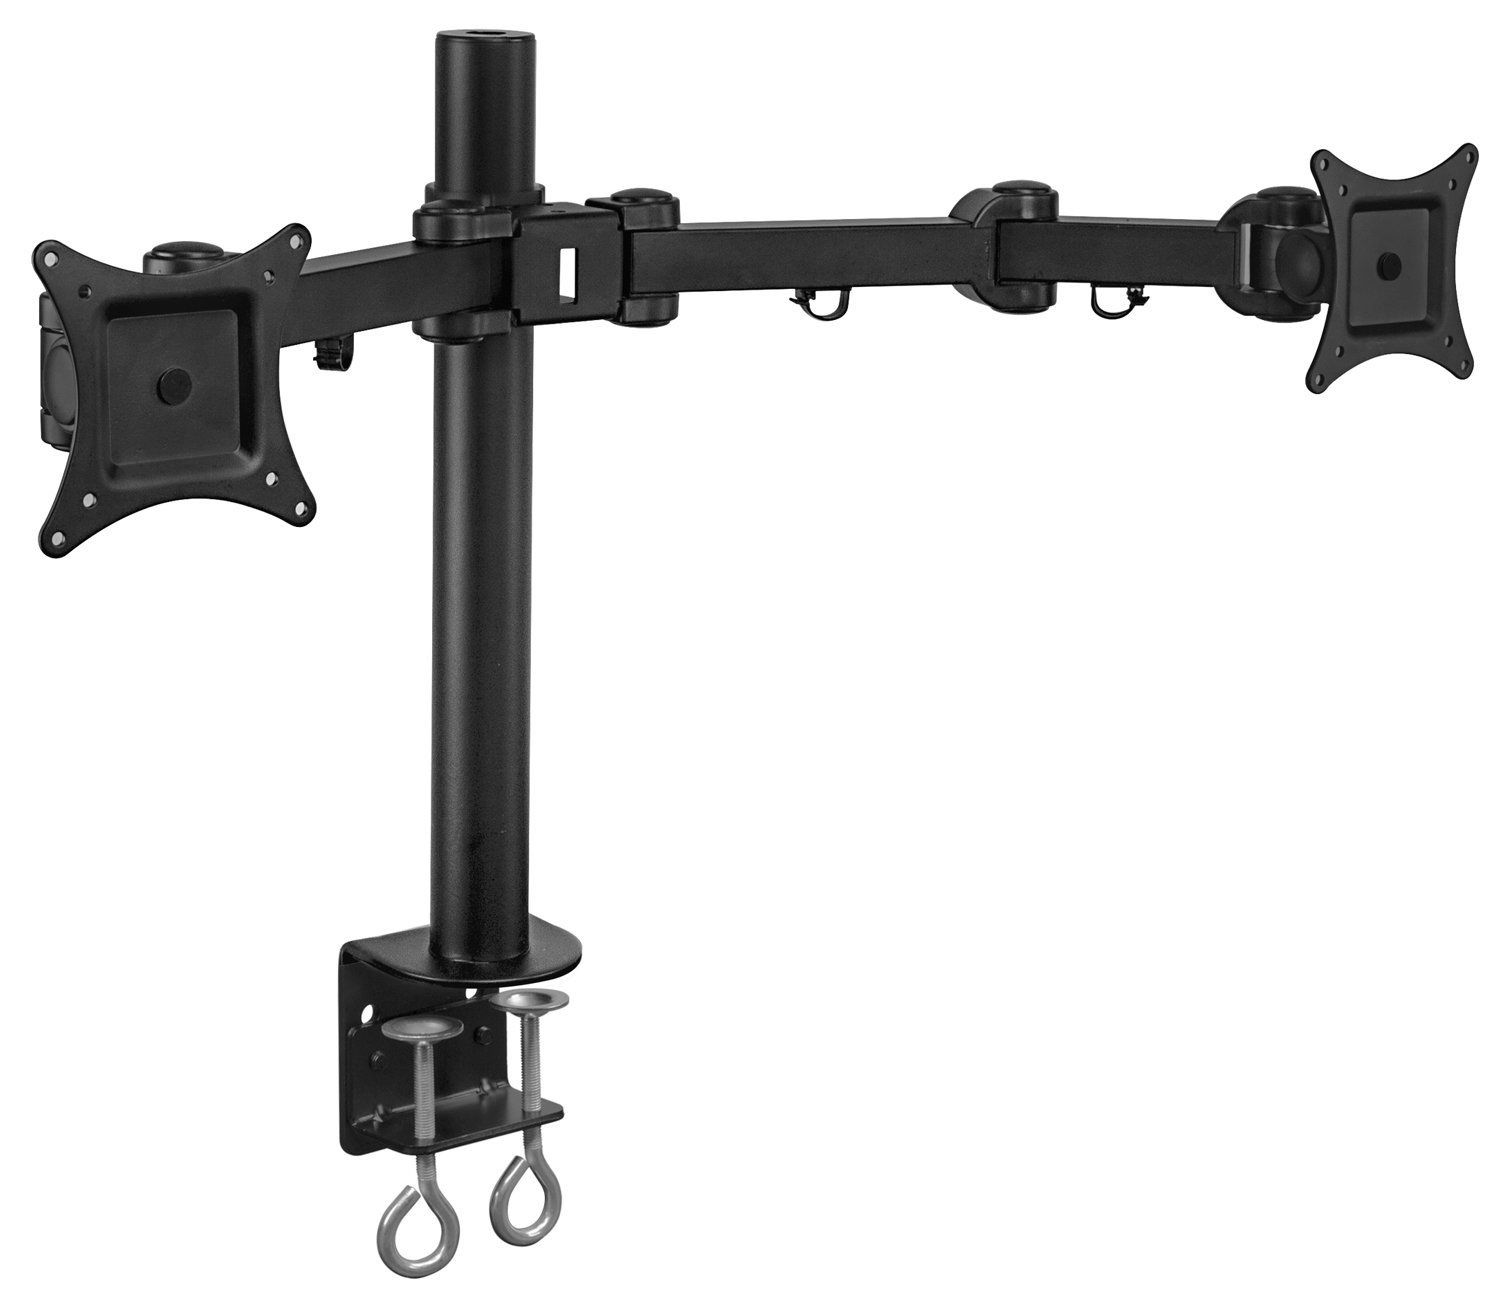 New - Dual Monitor Mount Stand Heavy Duty Fits 2 Screens Up To 27"